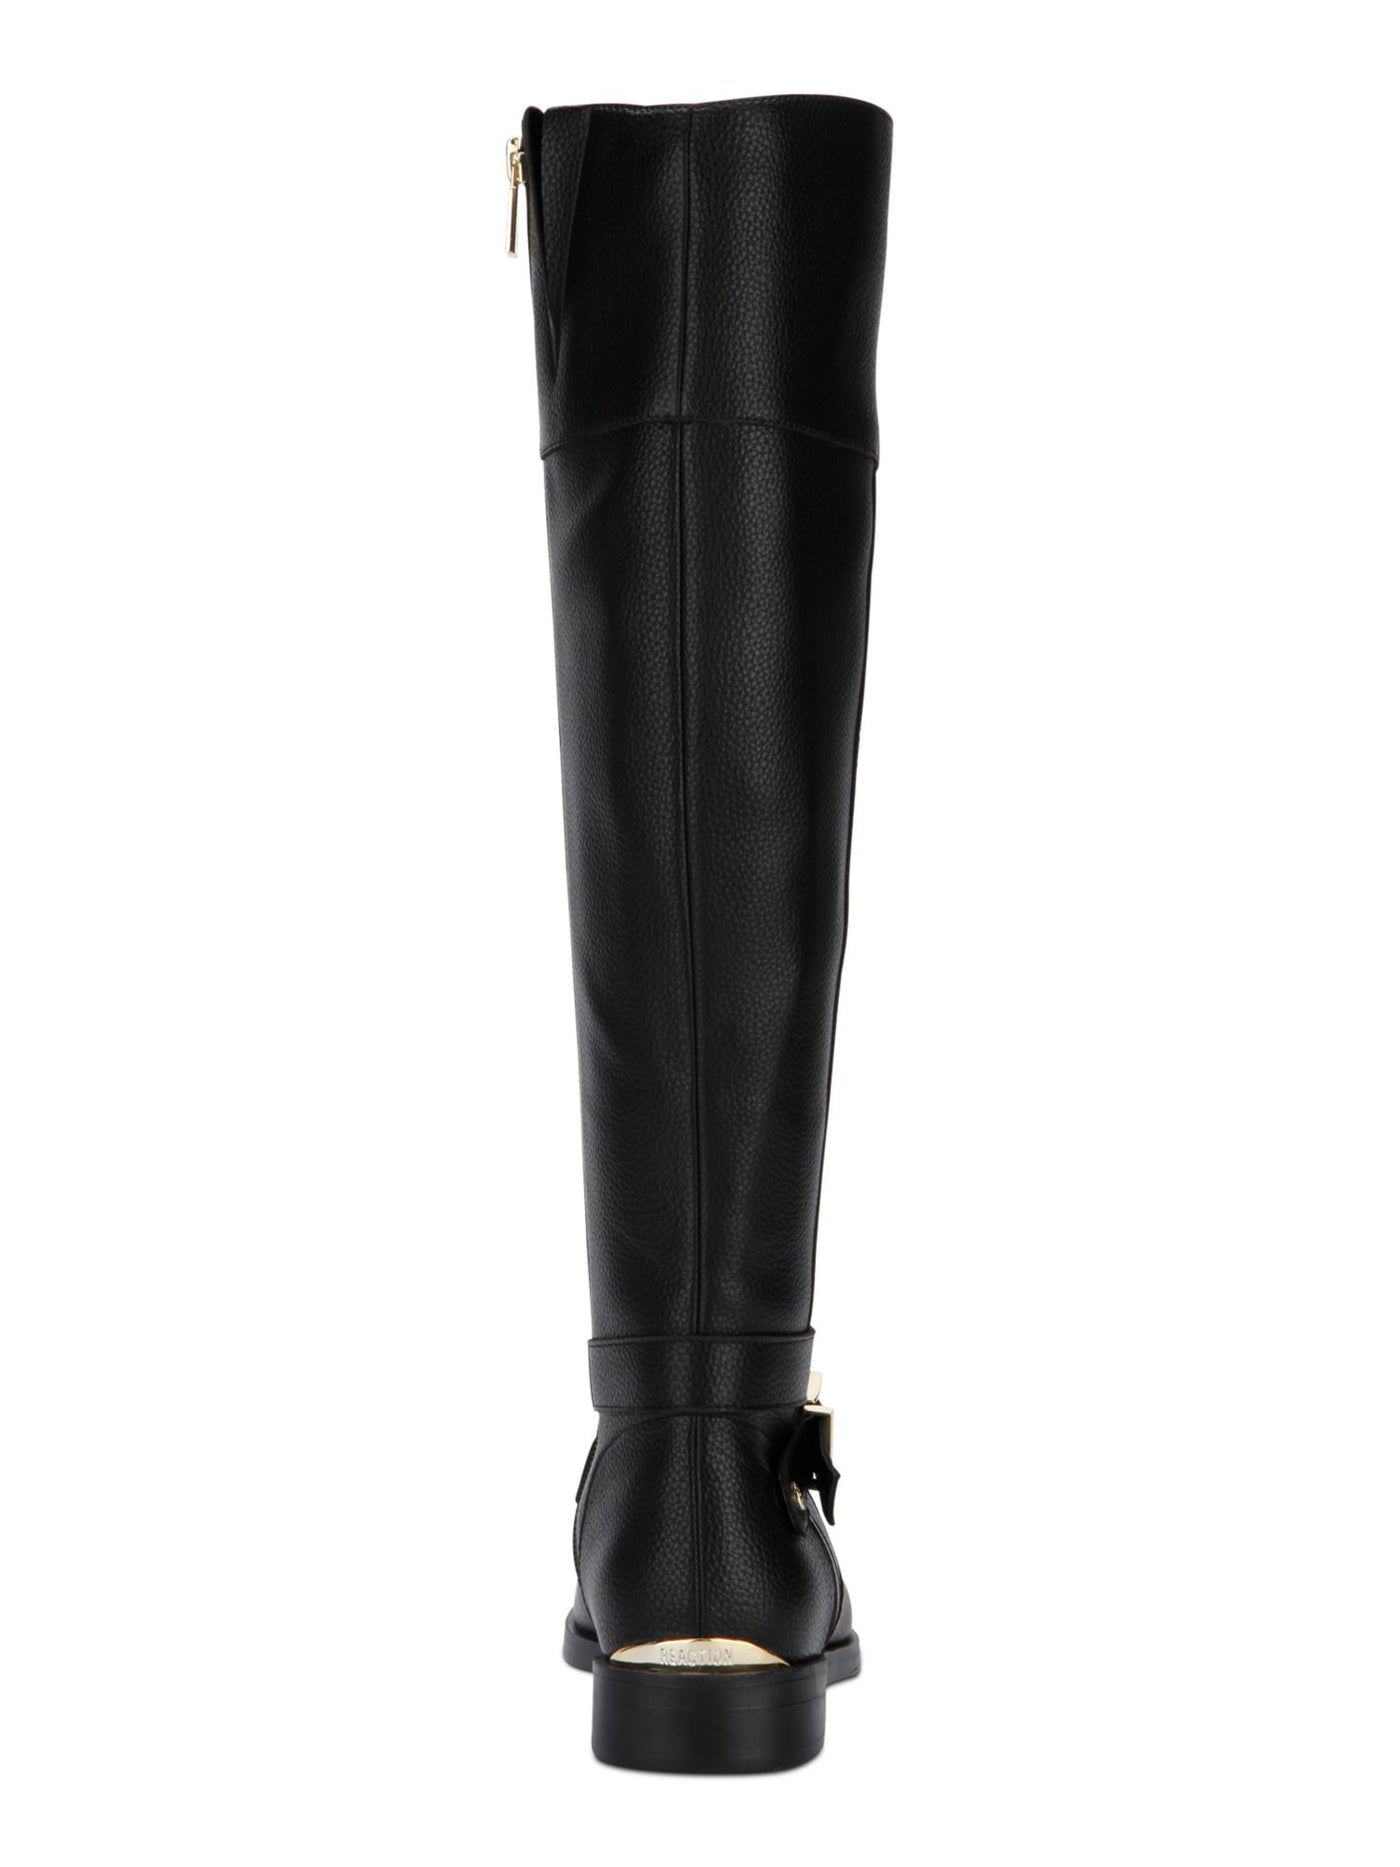 REACTION KENNETH COLE Womens Black Thermoplastic Sole Gold Heel Accent Buckle Accent Wind Almond Toe Zip-Up Riding Boot 11